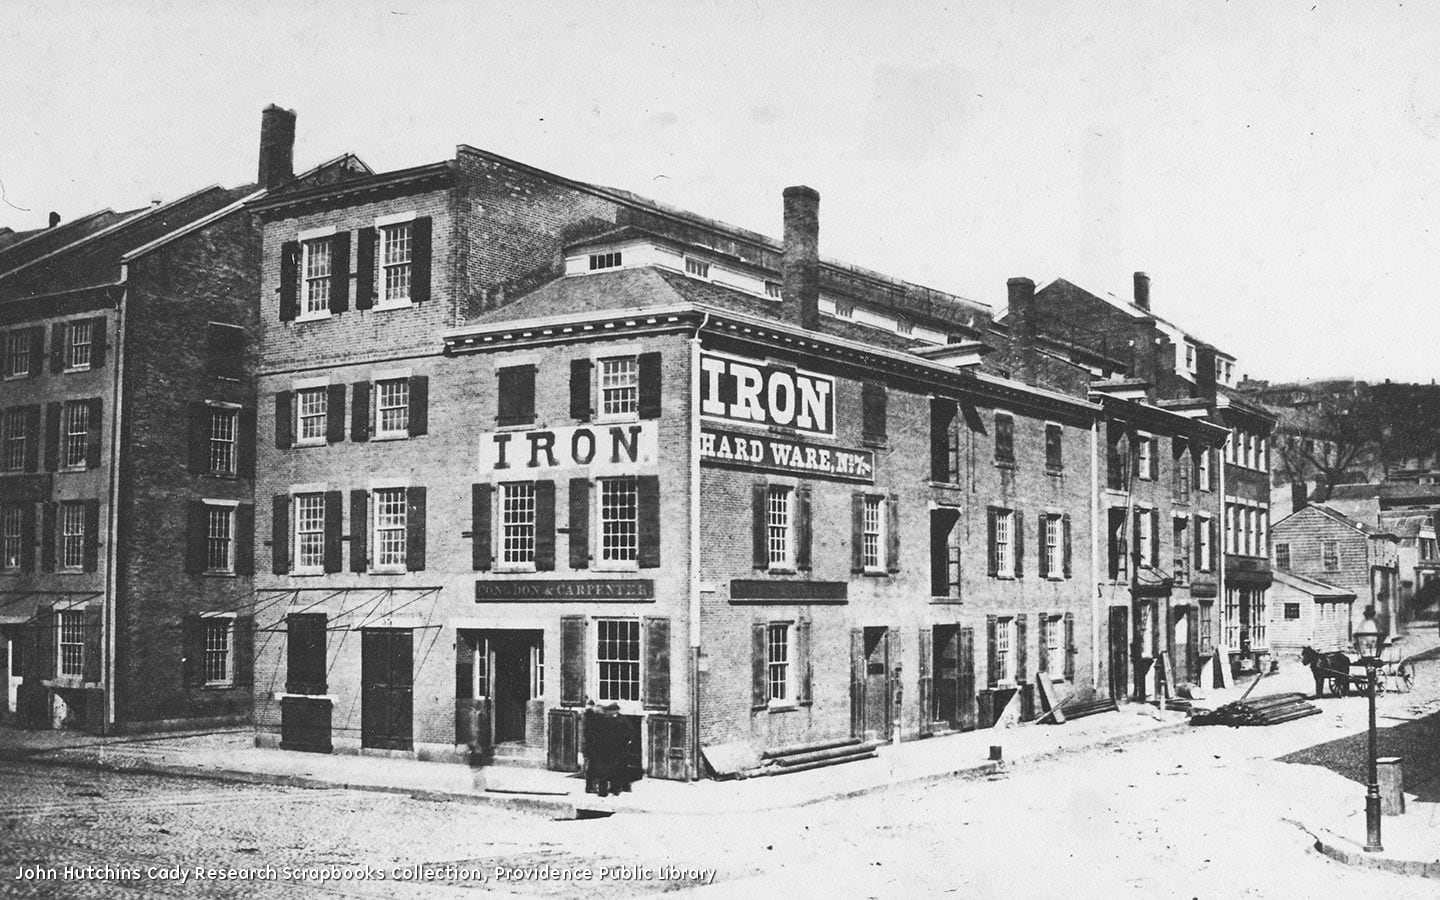 A block of three onjoined three- and four-story red brick buildings with granite window sills. The earliest building dates from 1793 and the latest from 1847. The oldest building is a four-story rectangular block with a flat roof; to the south is another older three-story building with a hipped monitor roof; in the middle is a three and a half story building with a clerstory monitor roof; and on the east end is a four-and-a-half story building with another clerstory monitor roof.